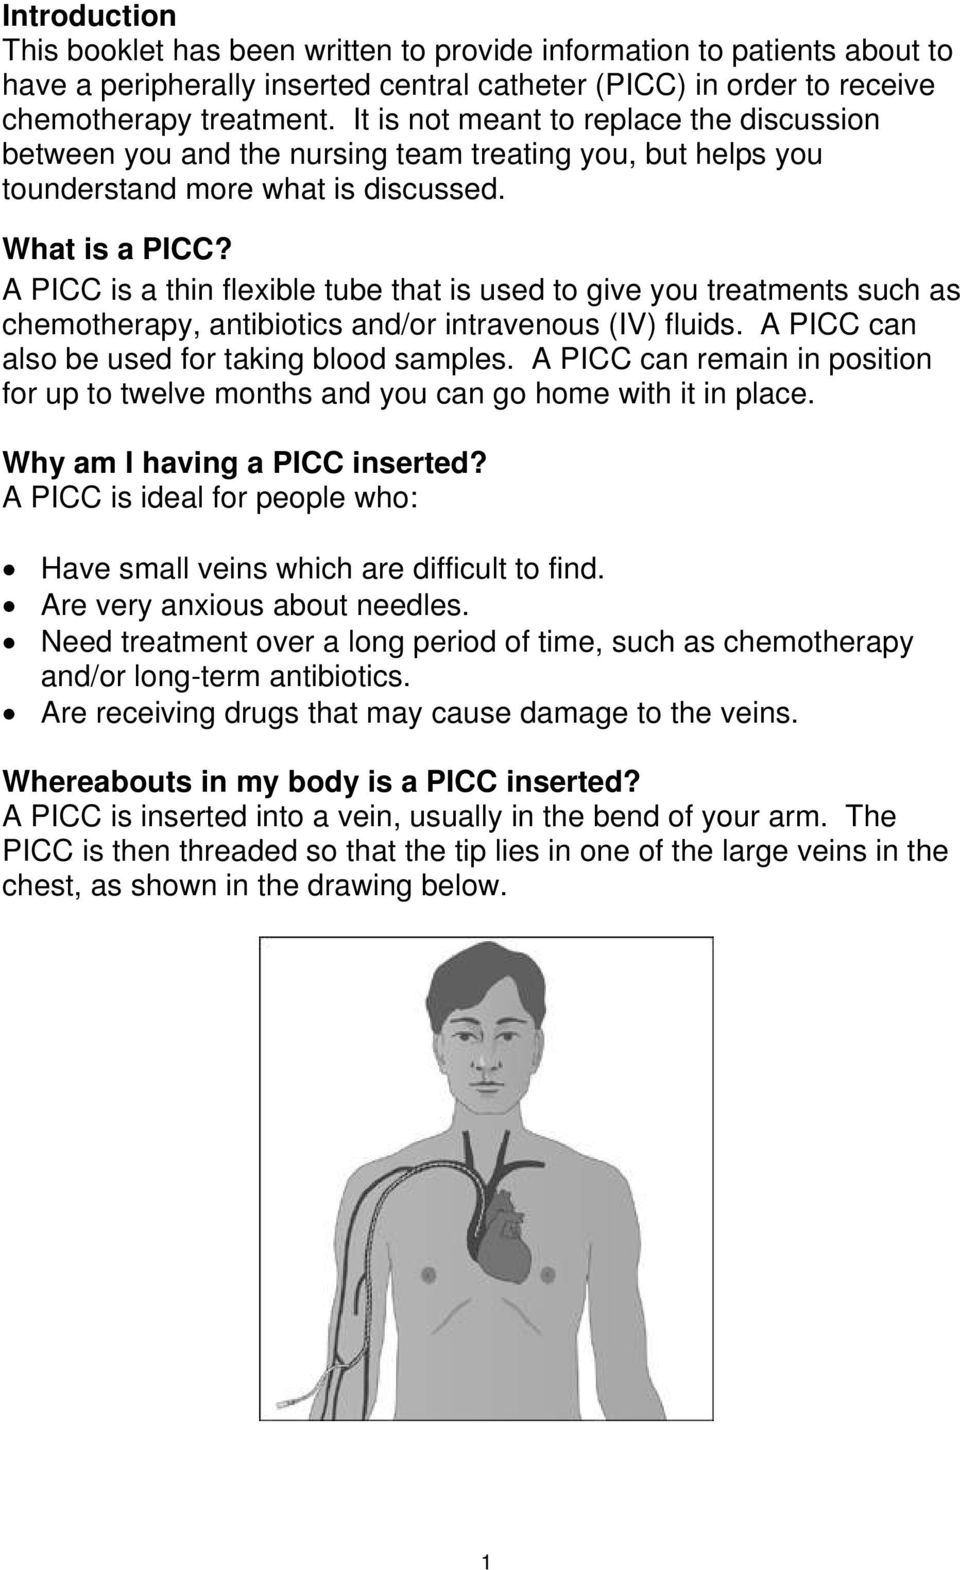 A PICC is a thin flexible tube that is used to give you treatments such as chemotherapy, antibiotics and/or intravenous (IV) fluids. A PICC can also be used for taking blood samples.